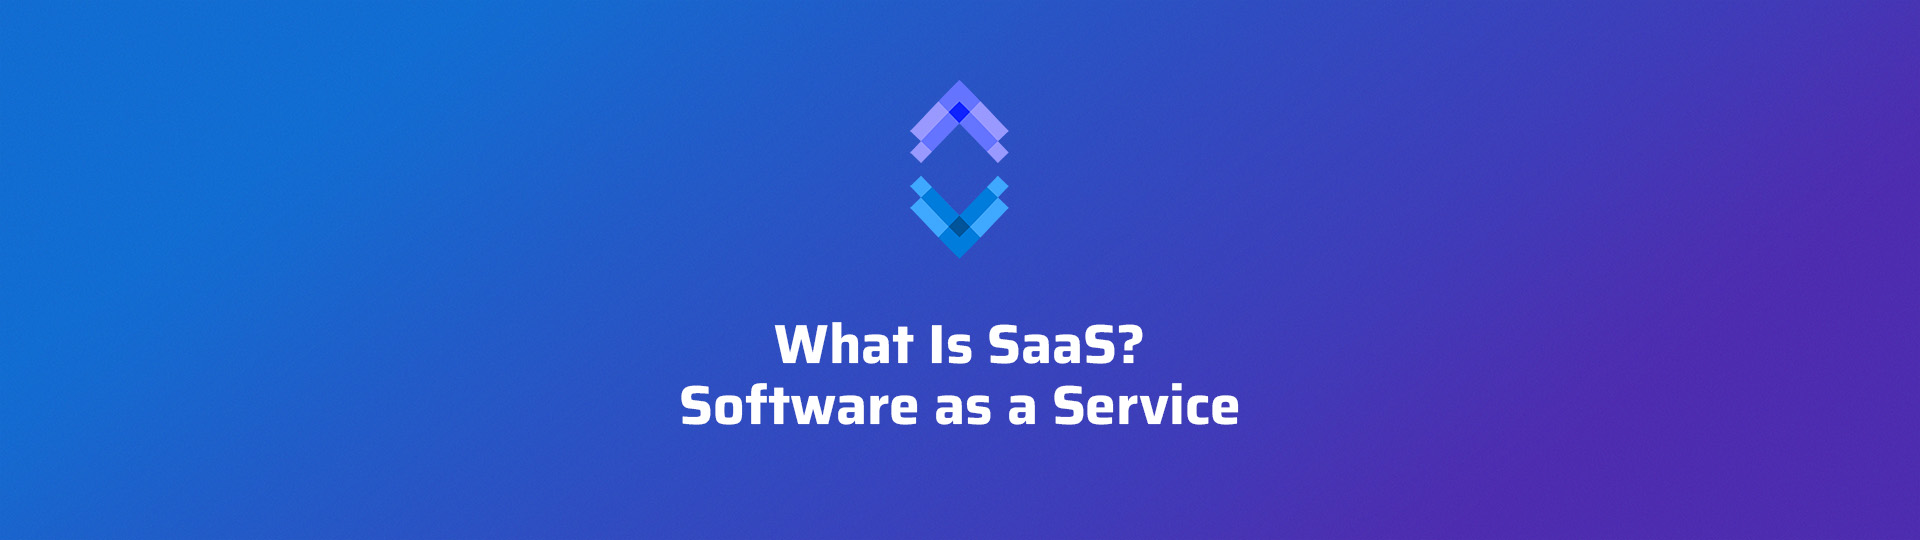 What Is SaaS Software as a Service